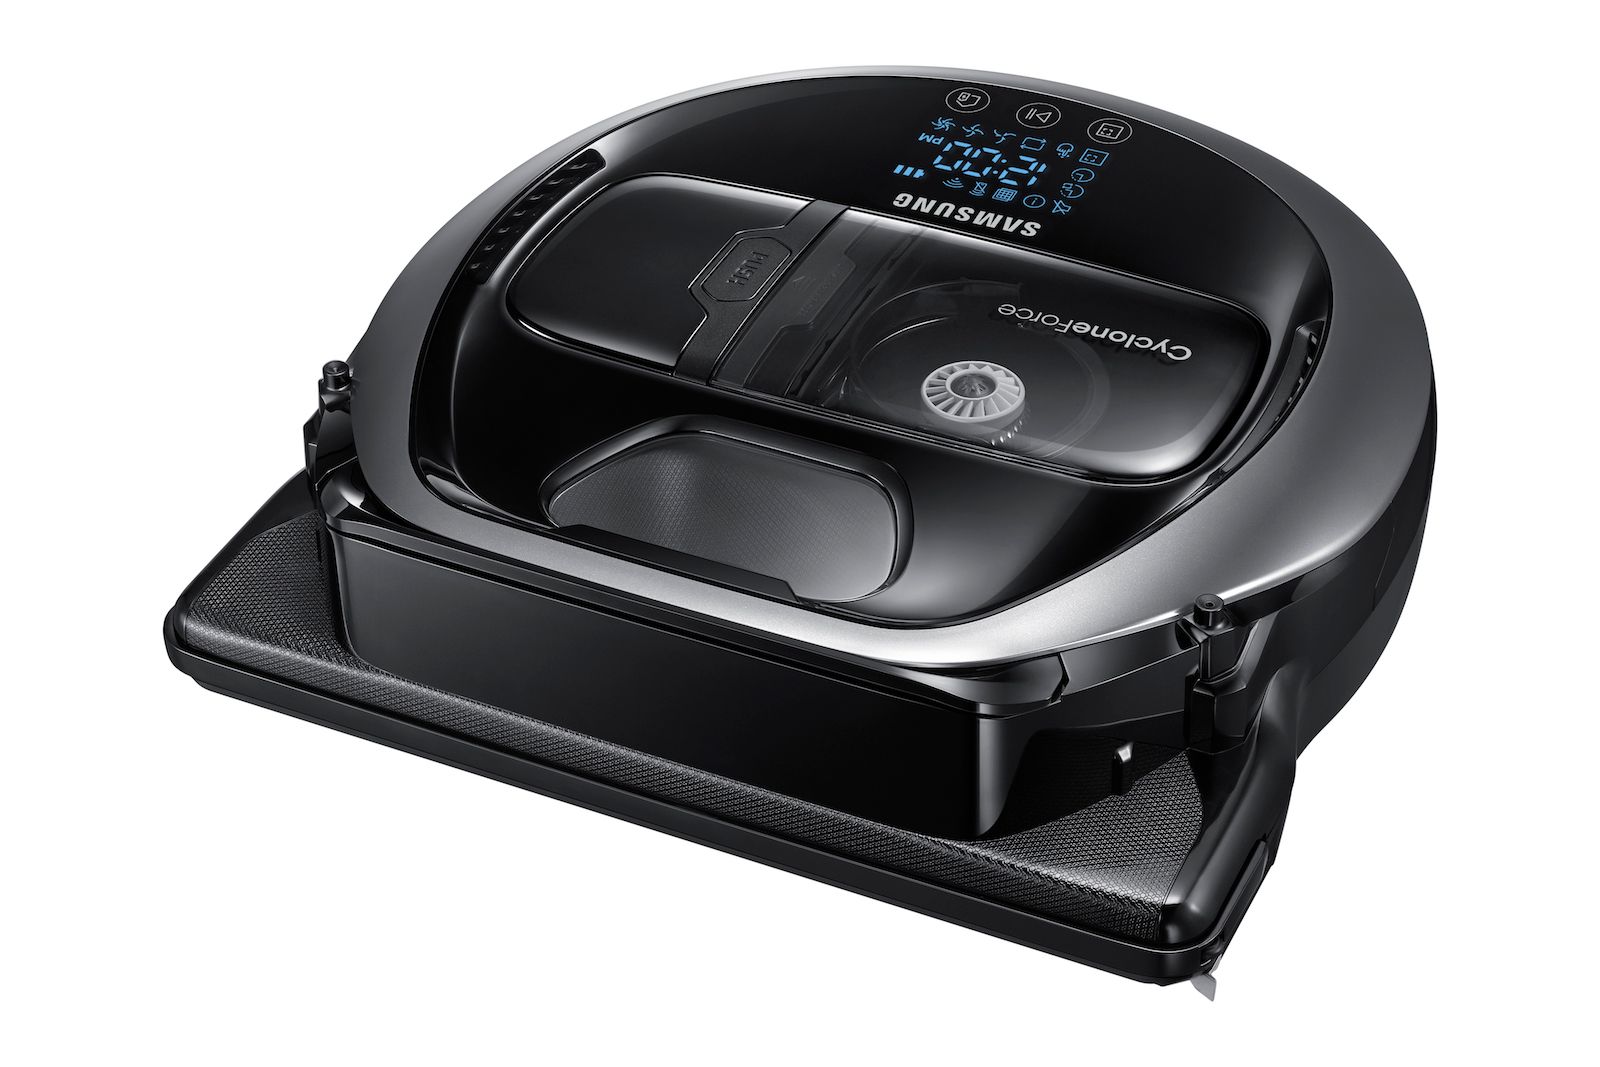 samsung vr7000 robot vacuum will eat your dust take commands from alexa image 1